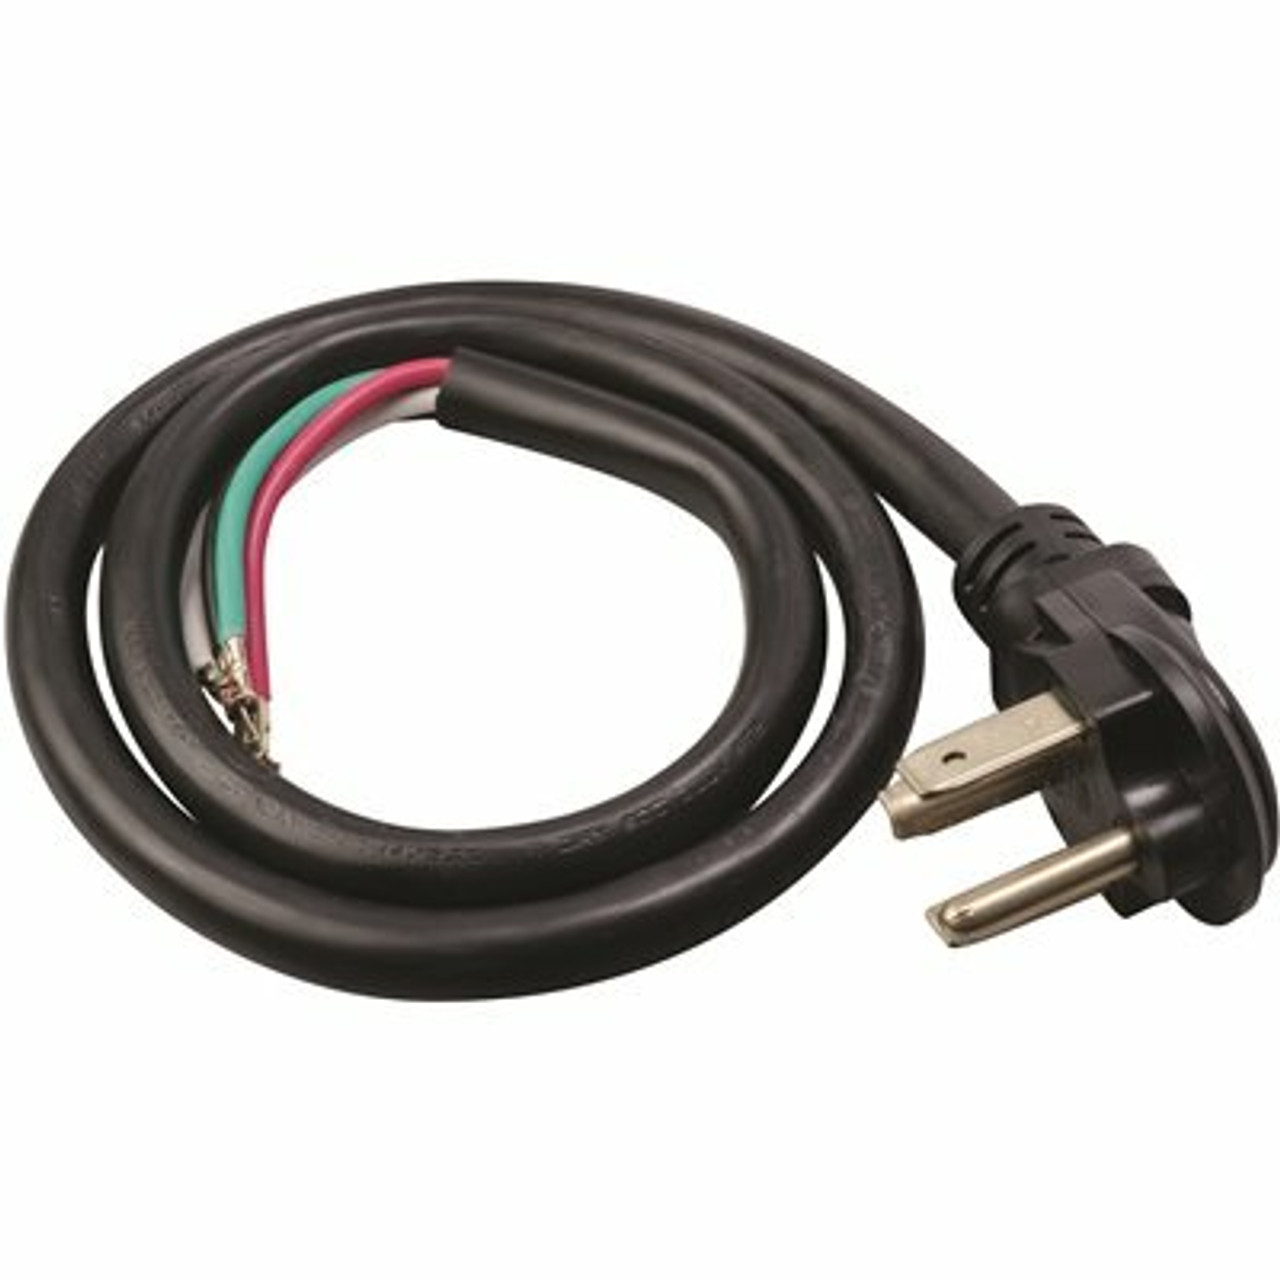 Southwire 4 Ft. 10/4 Round Dryer Cord In Black